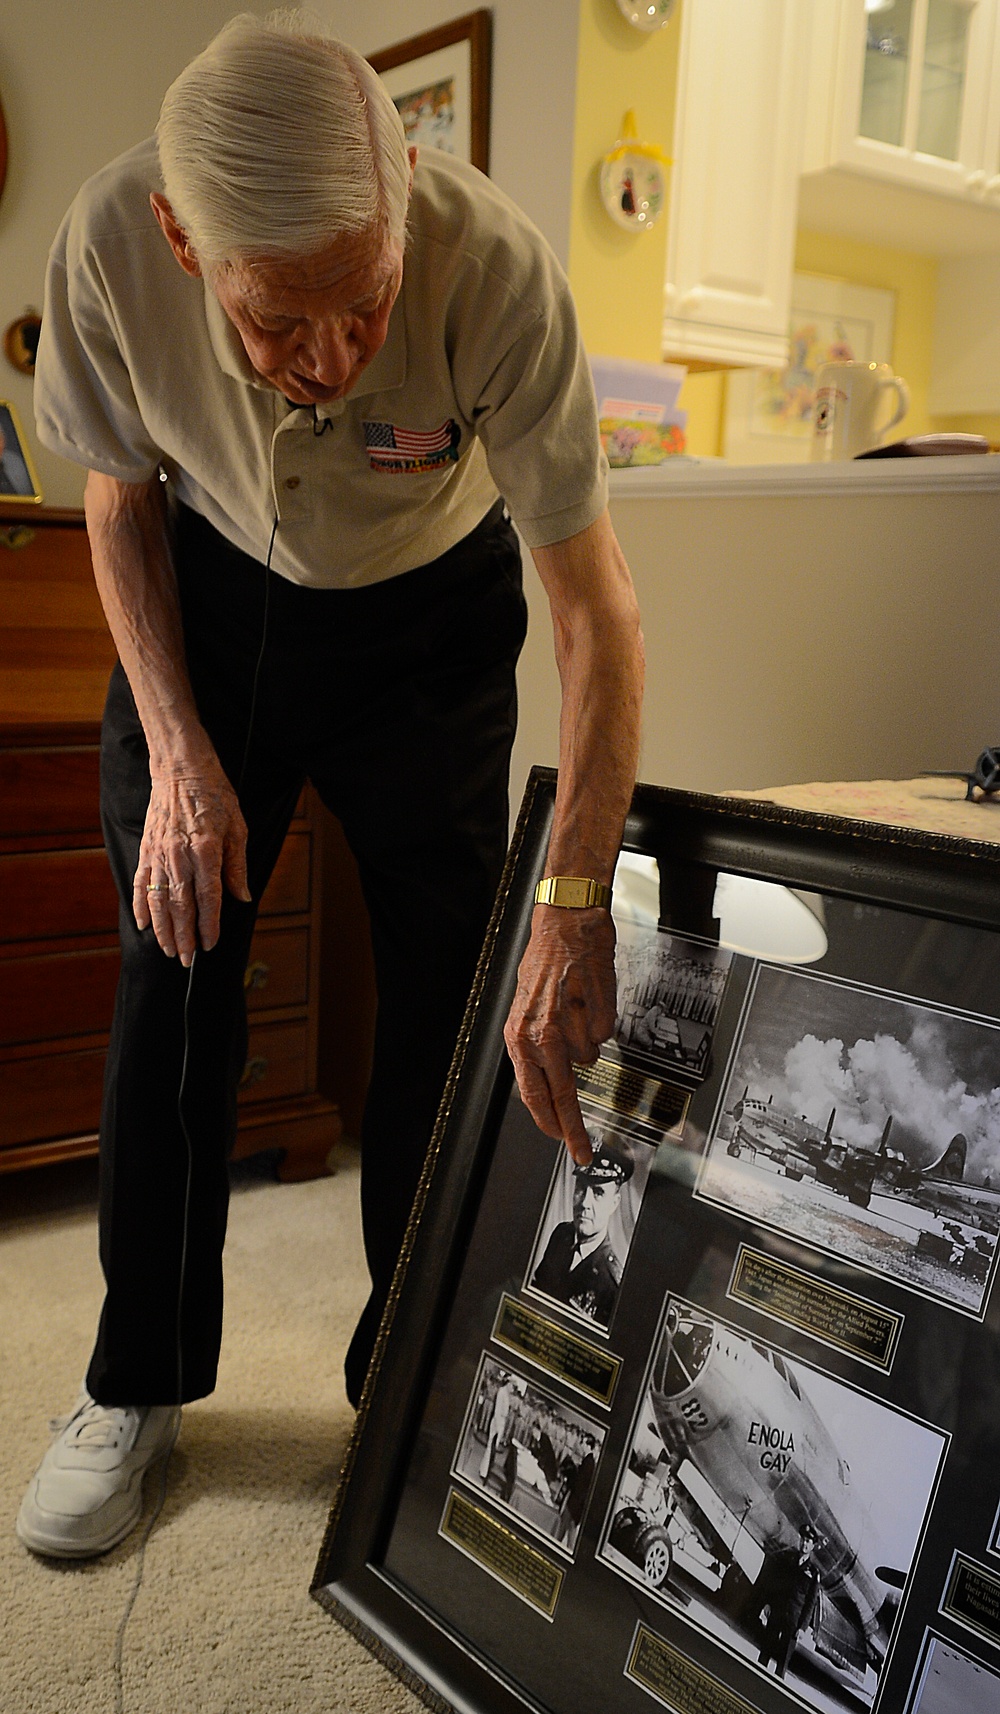 Last surviving member from Hiroshima nuclear bombing mission reflects on 70th anniversary